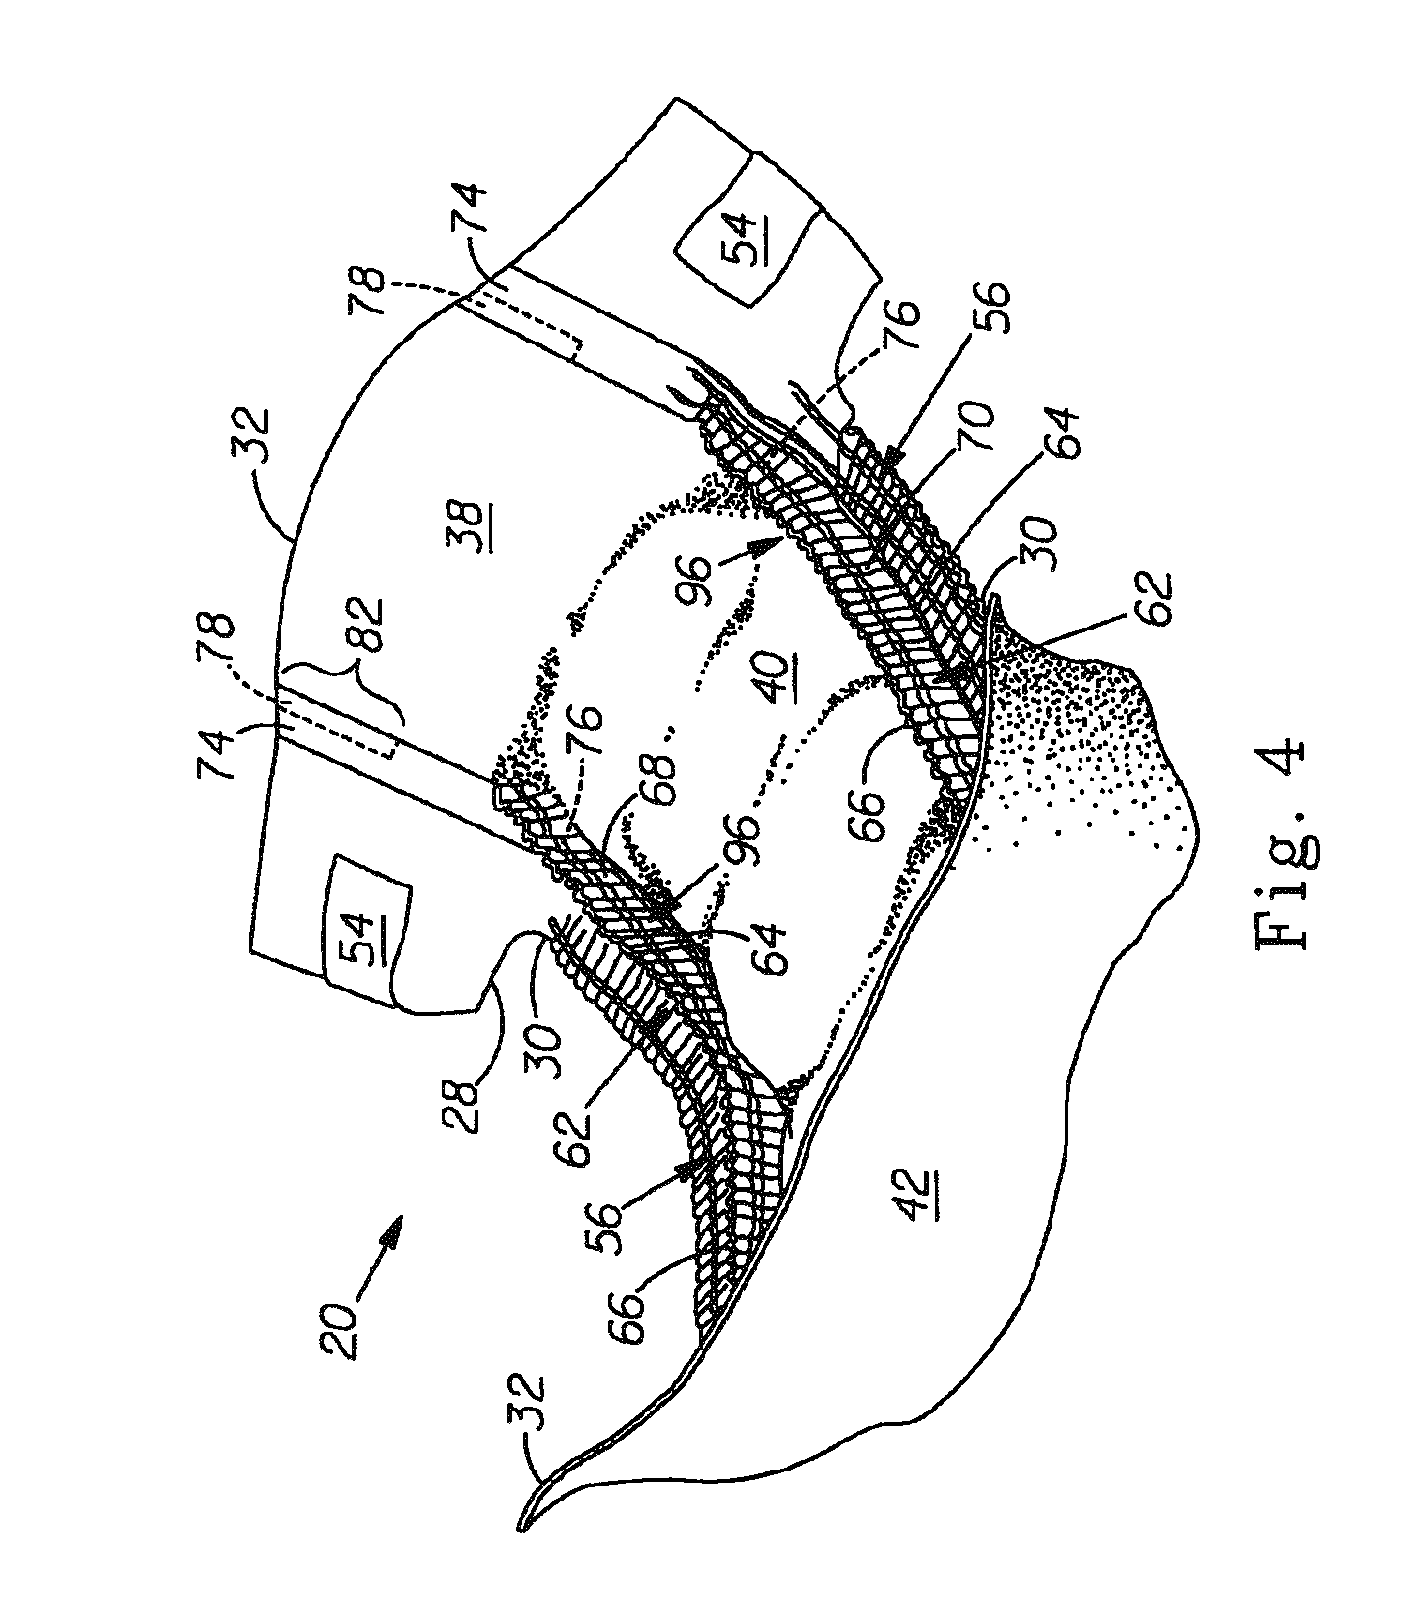 Barrier cuff for a unitary disposable absorbent article having intermediate bond for sustained fit